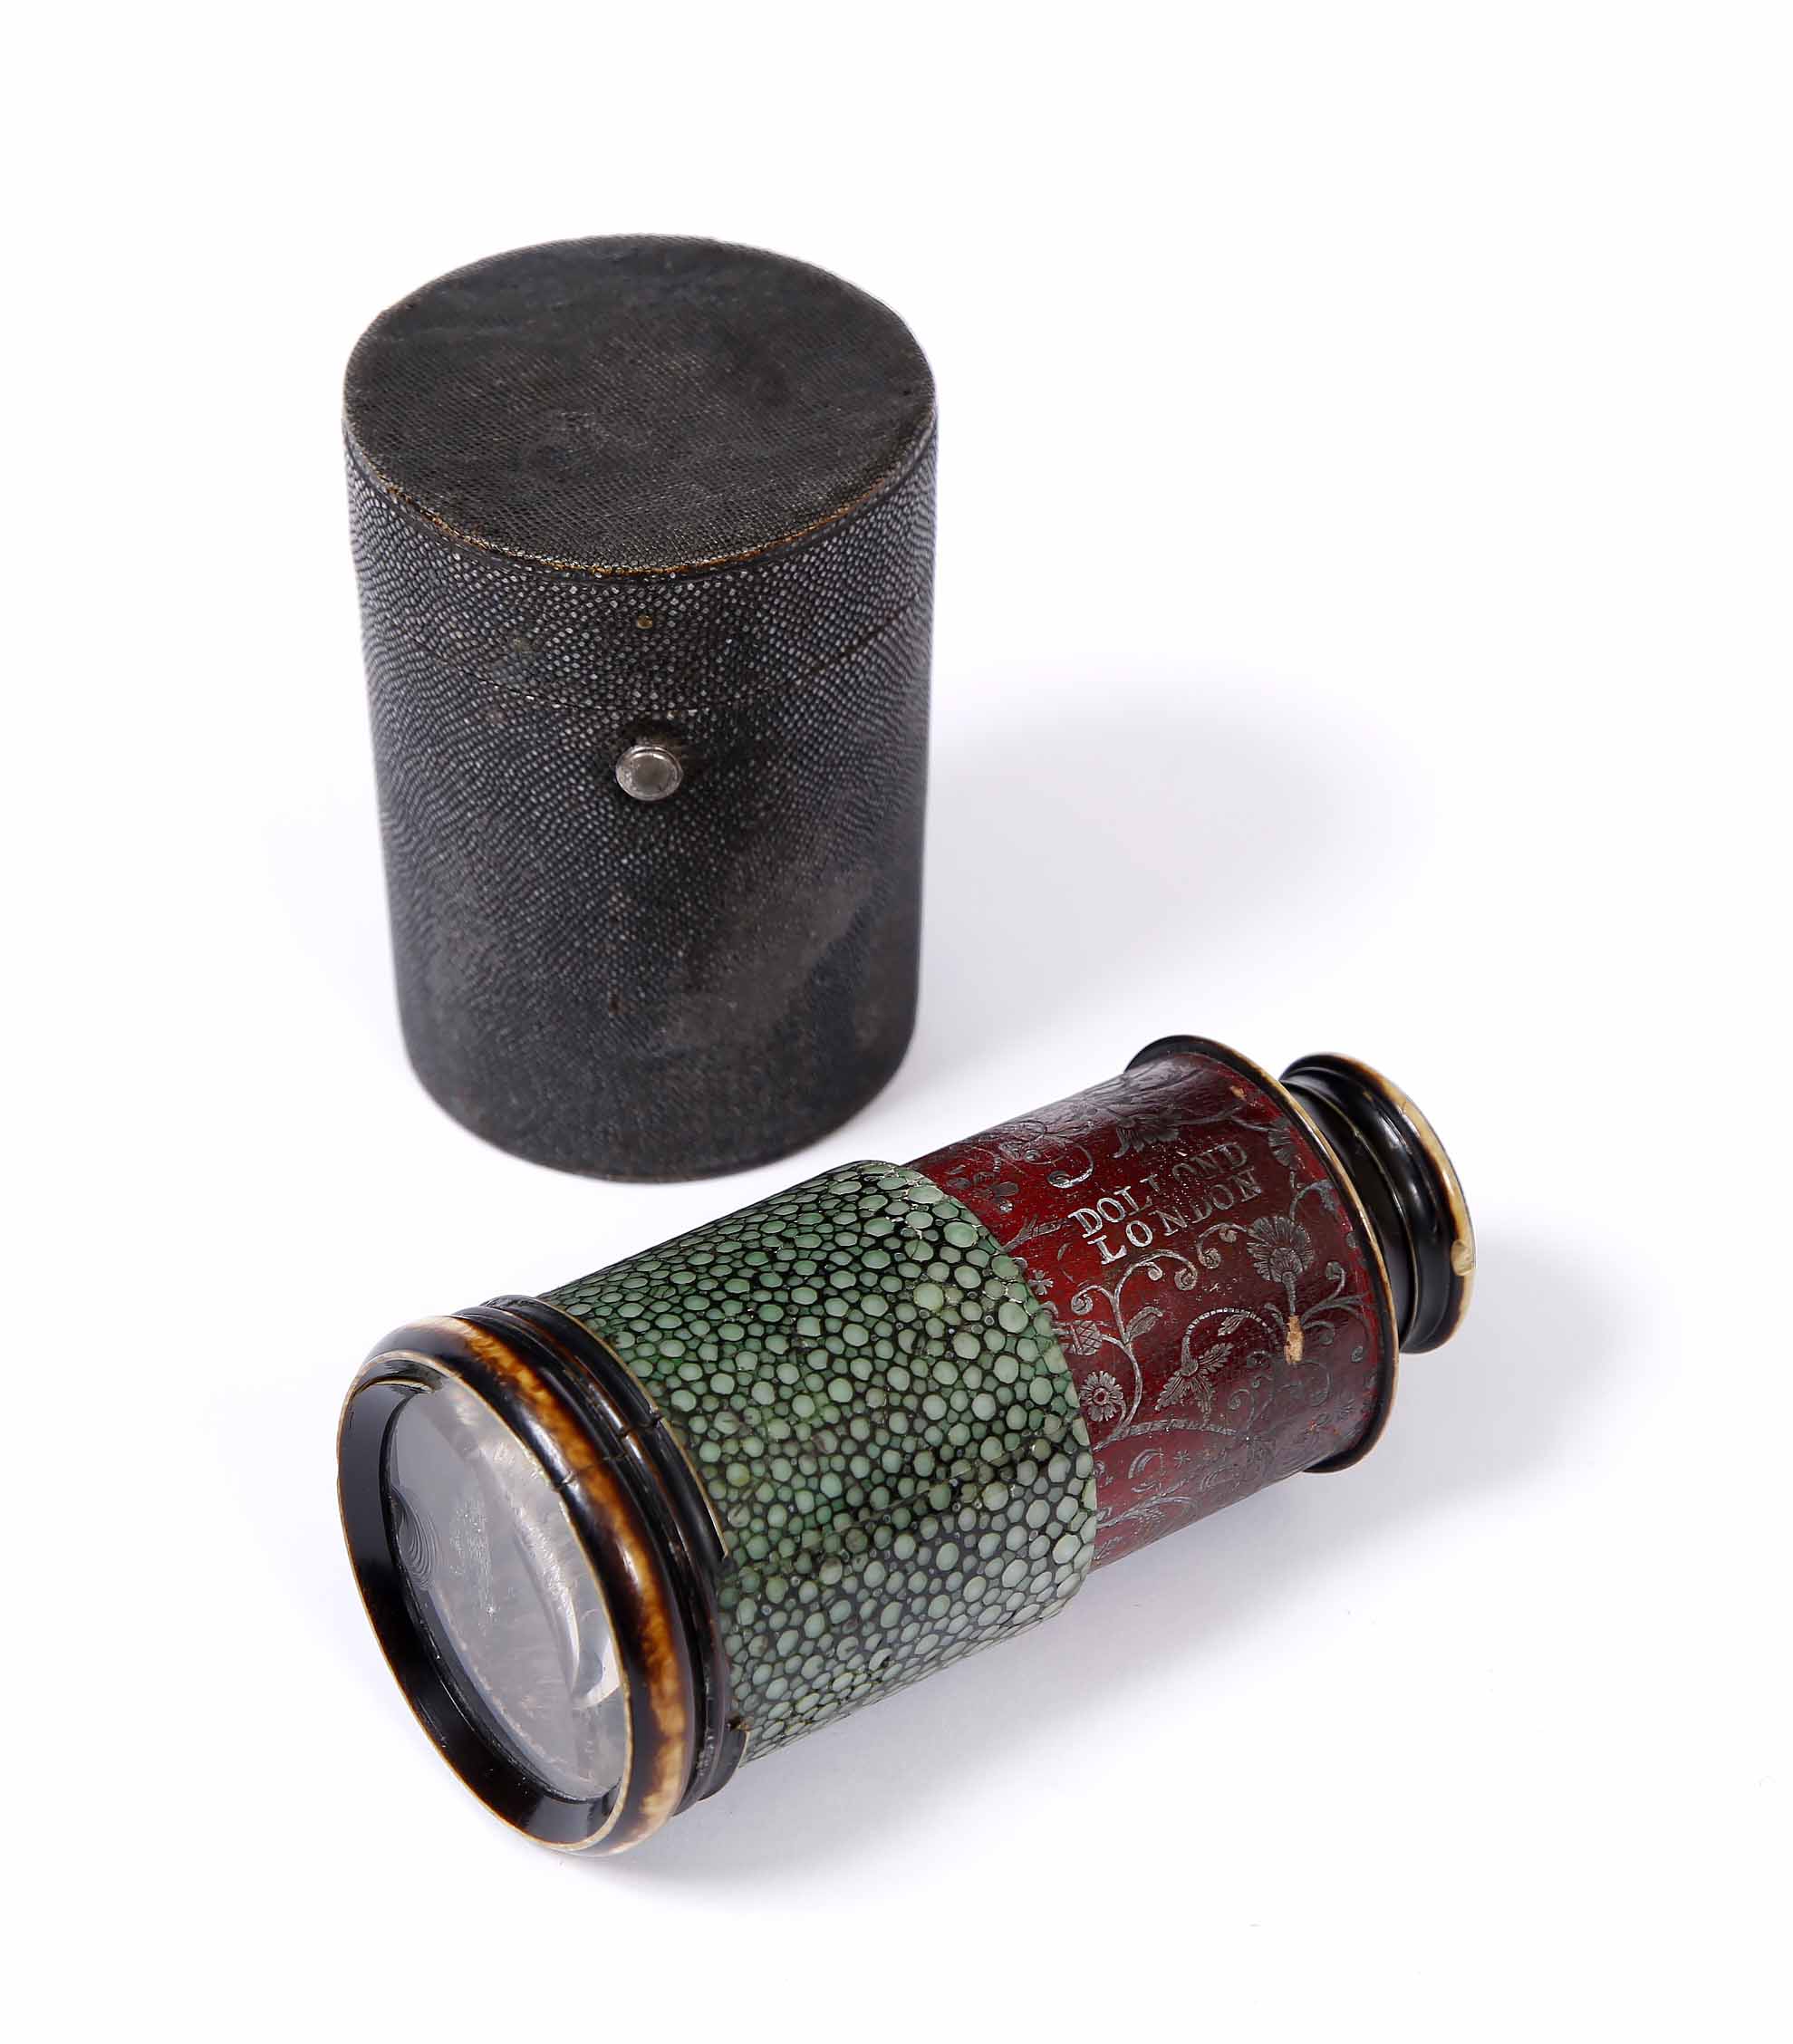 A SHAGREEN CASED TELESCOPE / VIEWER also with shagreen banding and tooled leather barrel, 8cm - Image 2 of 2